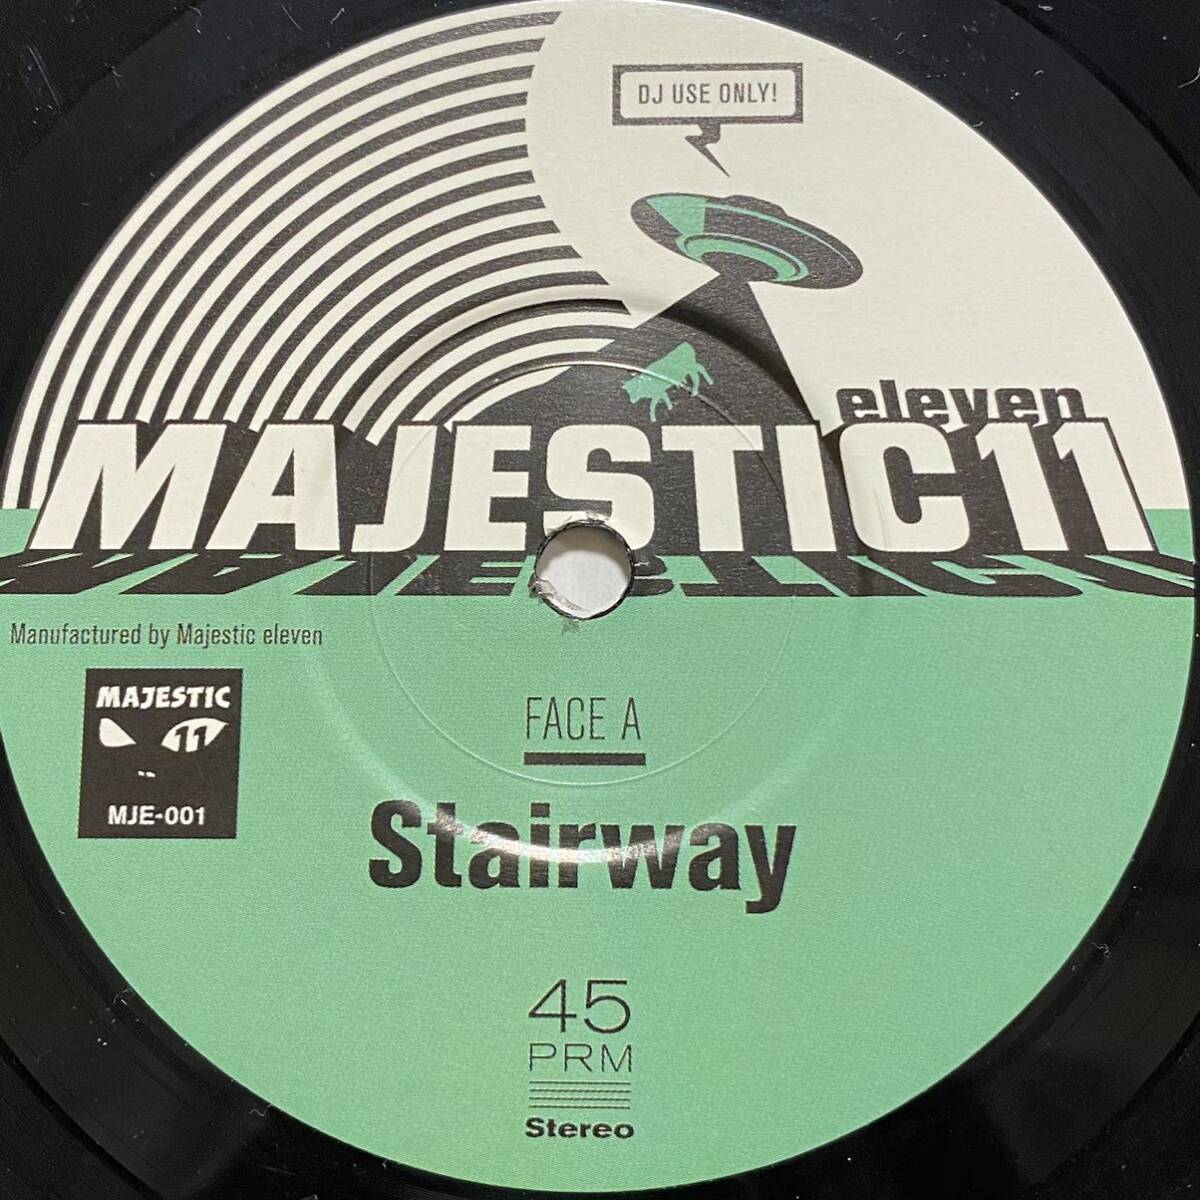 MAJESTIC11 STAIRWAY GIVE ME! 7inch 7インチ 45 rap hip hop Led Zeppelin Bar-Kays Shut The Funk Up Beastie Boys Daft Punk mash up_画像1